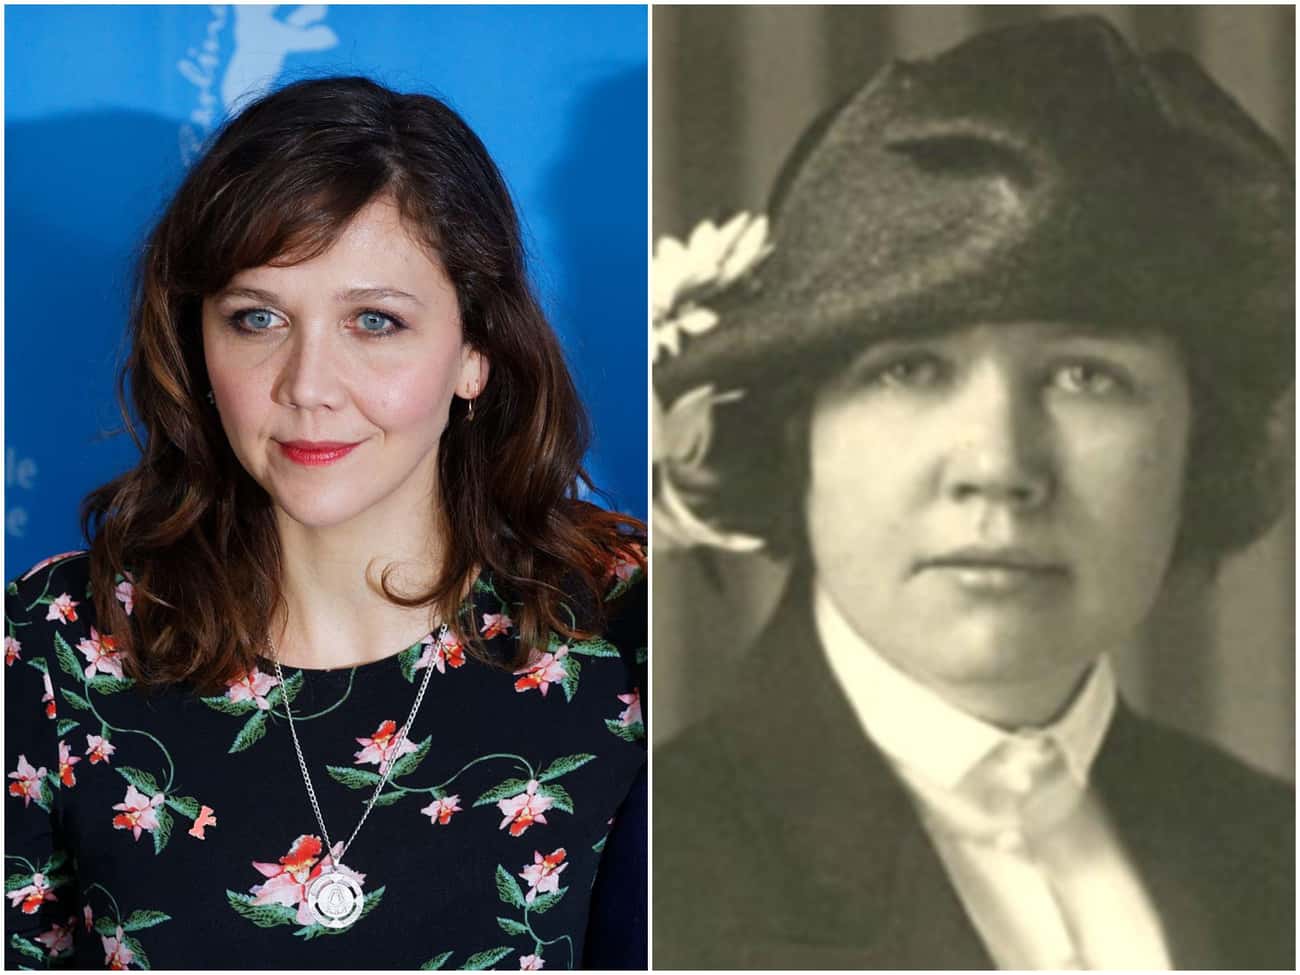 Journalist And Women’s Rights Leader Rose Wilder Lane As Portrayed By Maggie Gyllenhaal